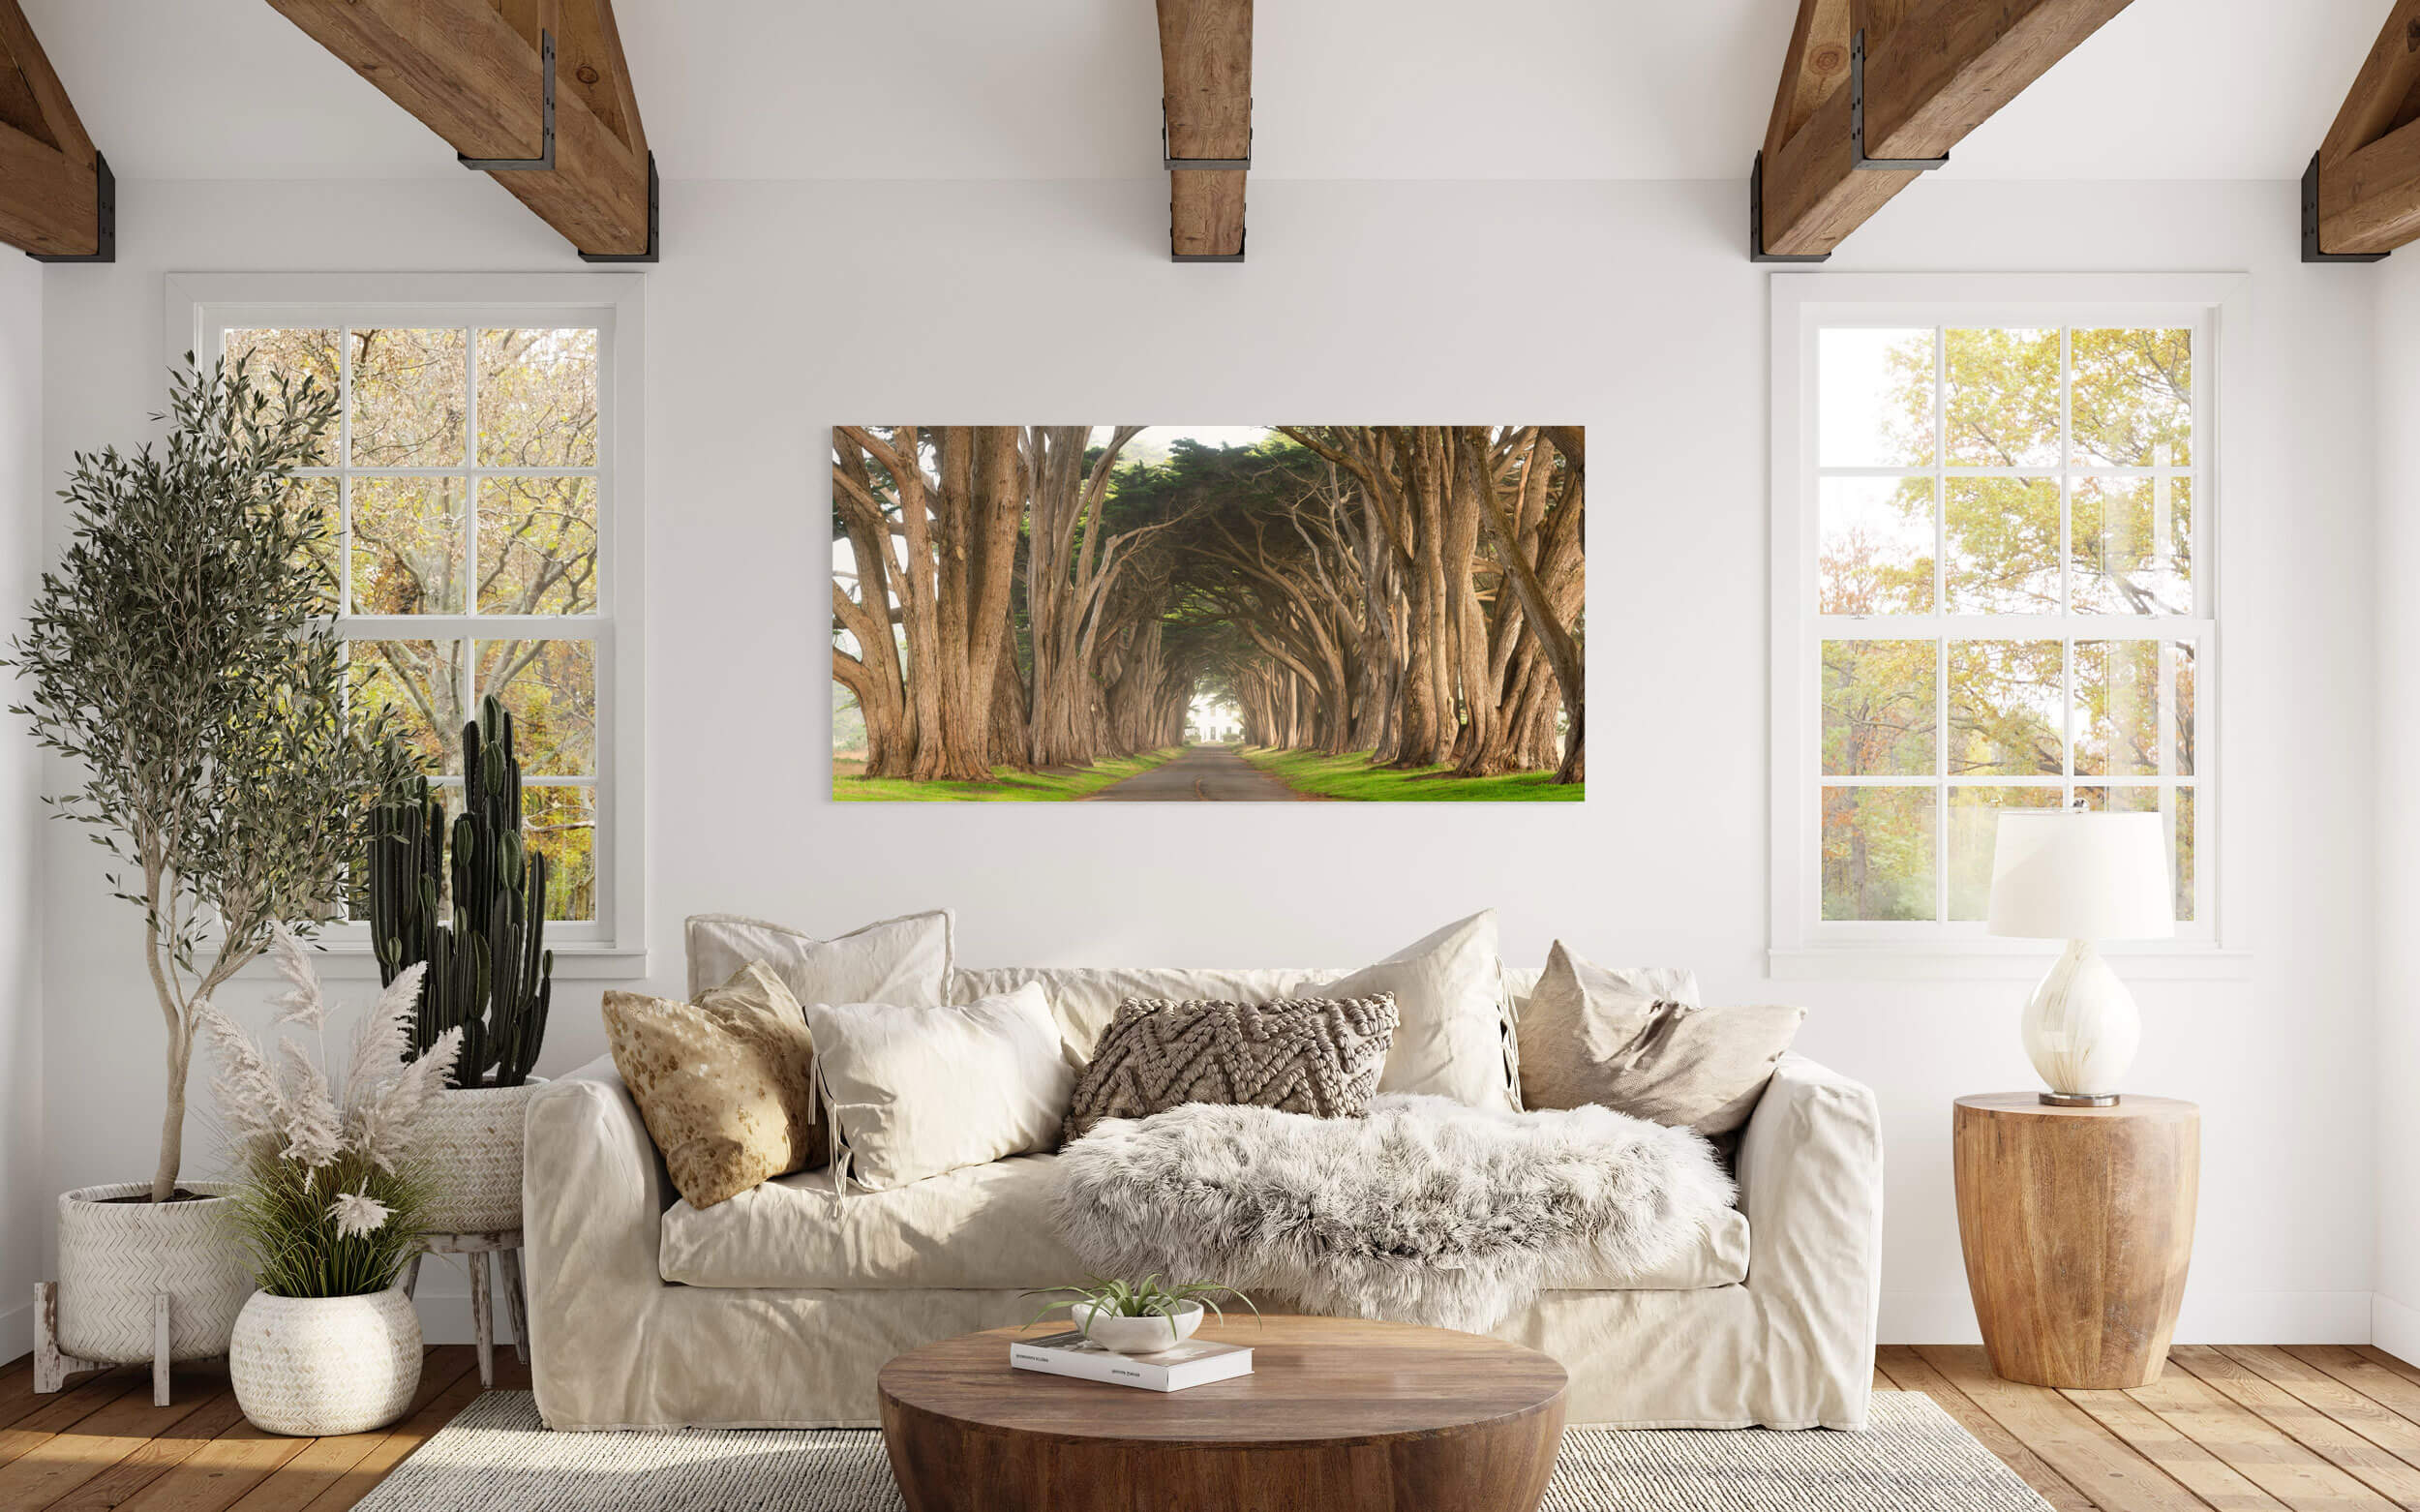 A Point Reyes cypress tree tunnel picture hangs in a living room.